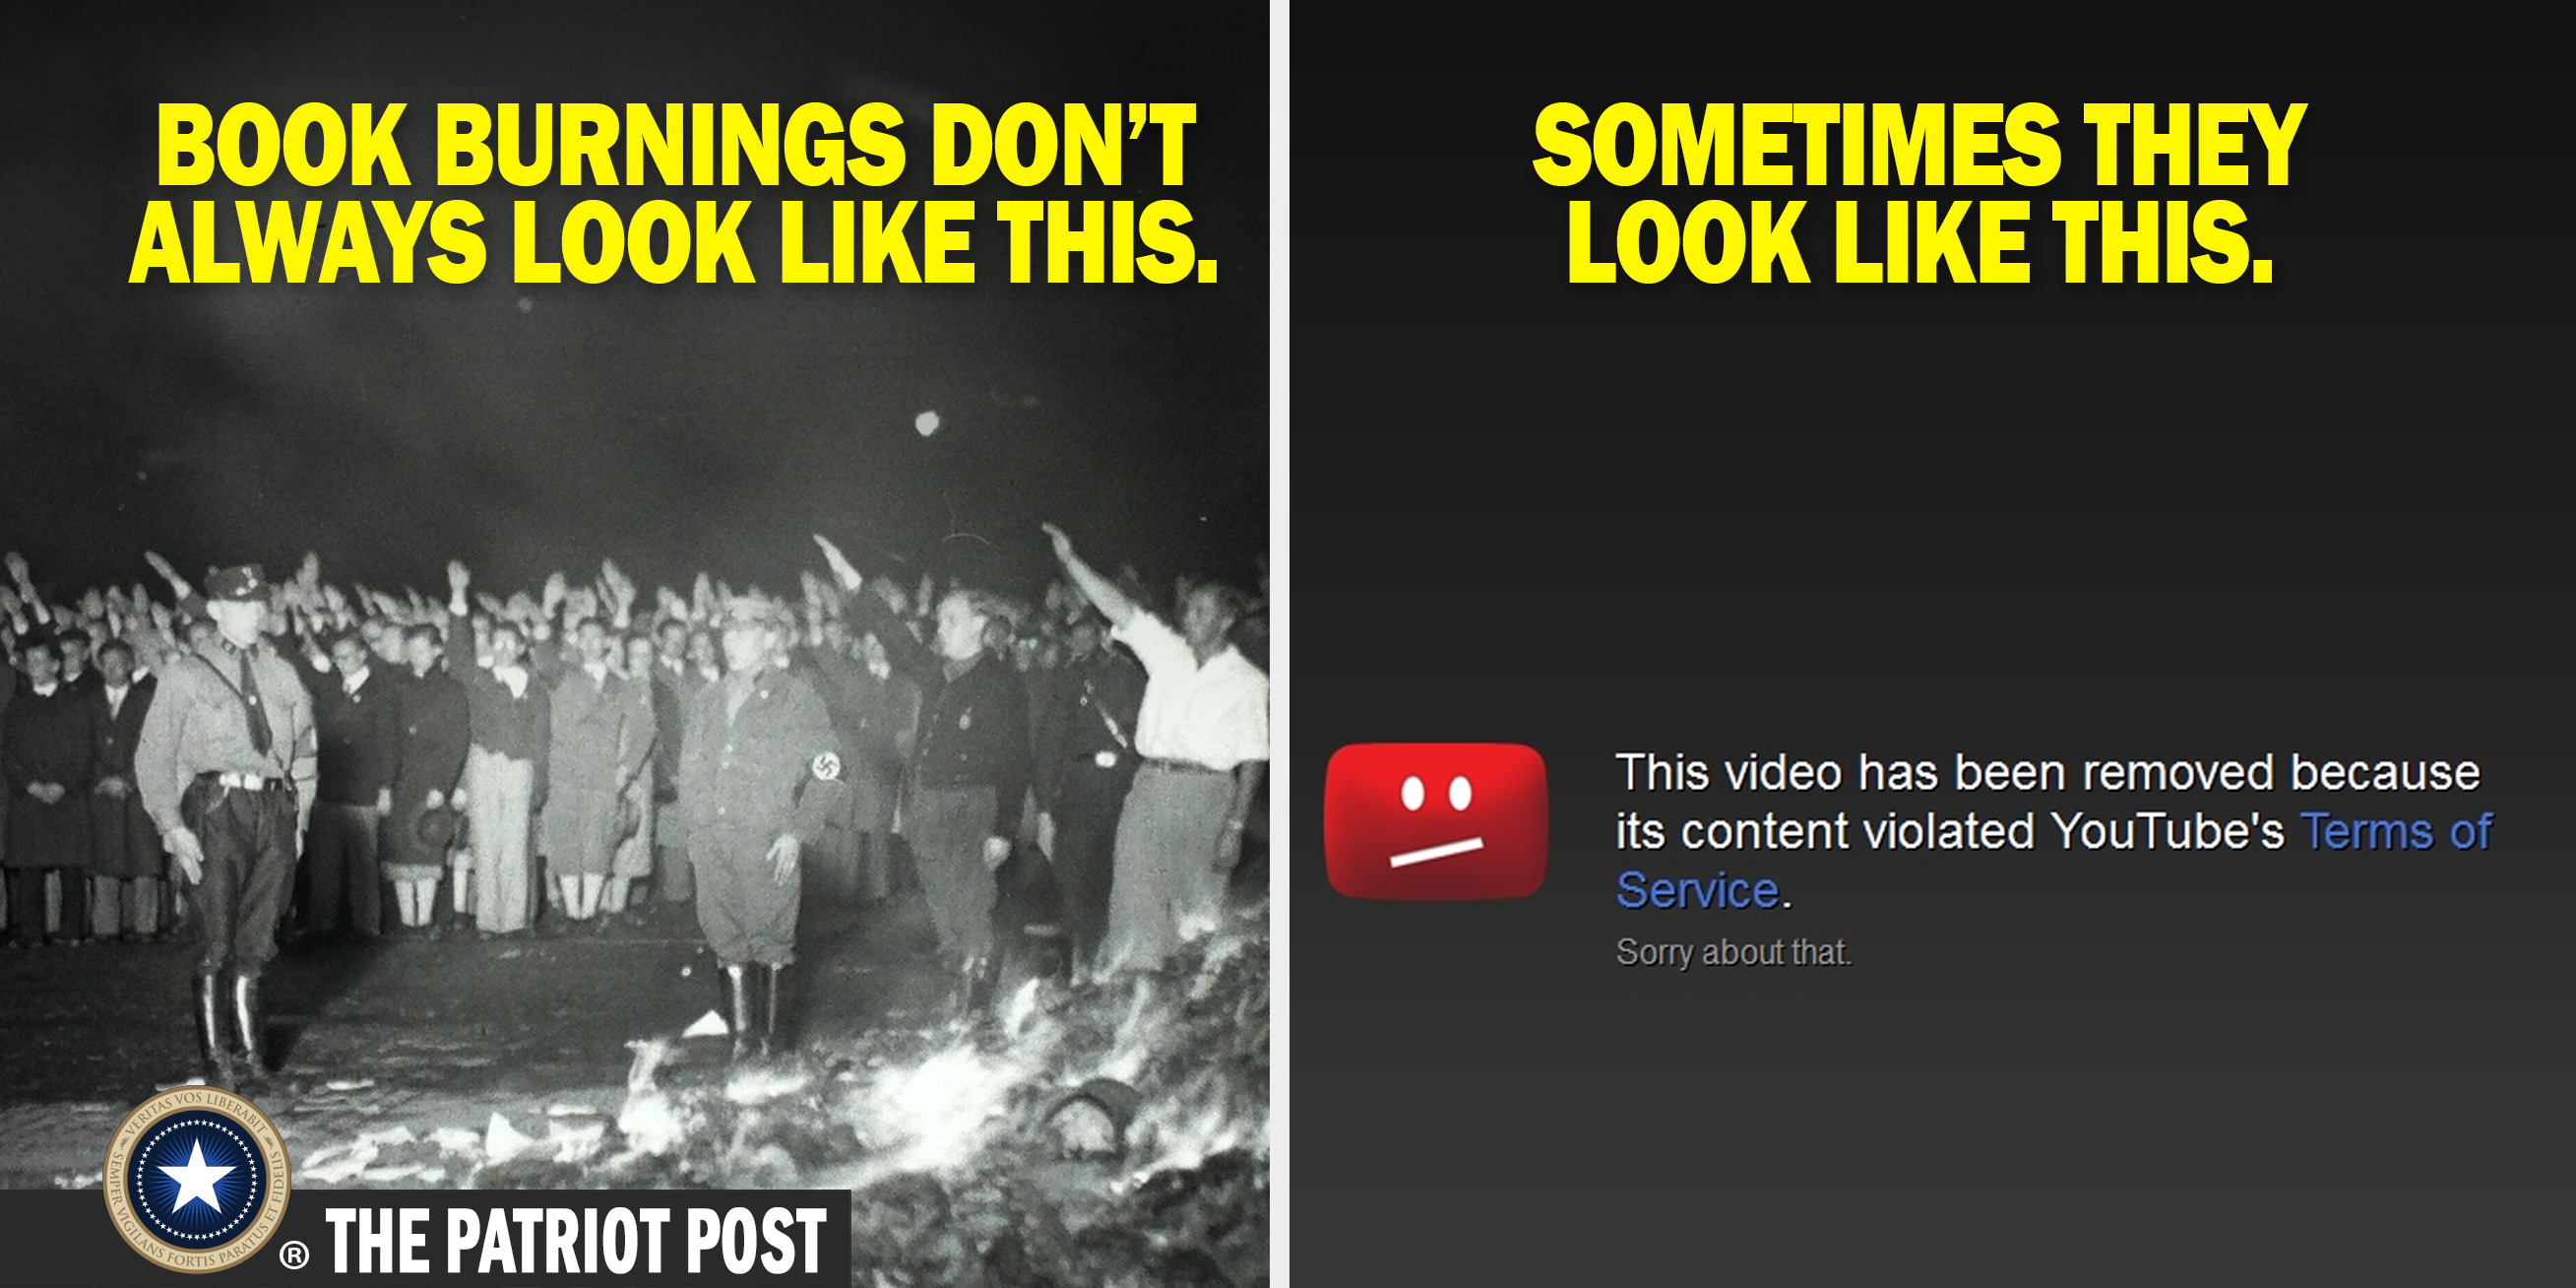 memes - nazi book burning - Book Burnings Don'T Always Look This. Sometimes They Look This. This video has been removed because its content violated YouTube's Terms of Service. Sorry about that The Patriot Post